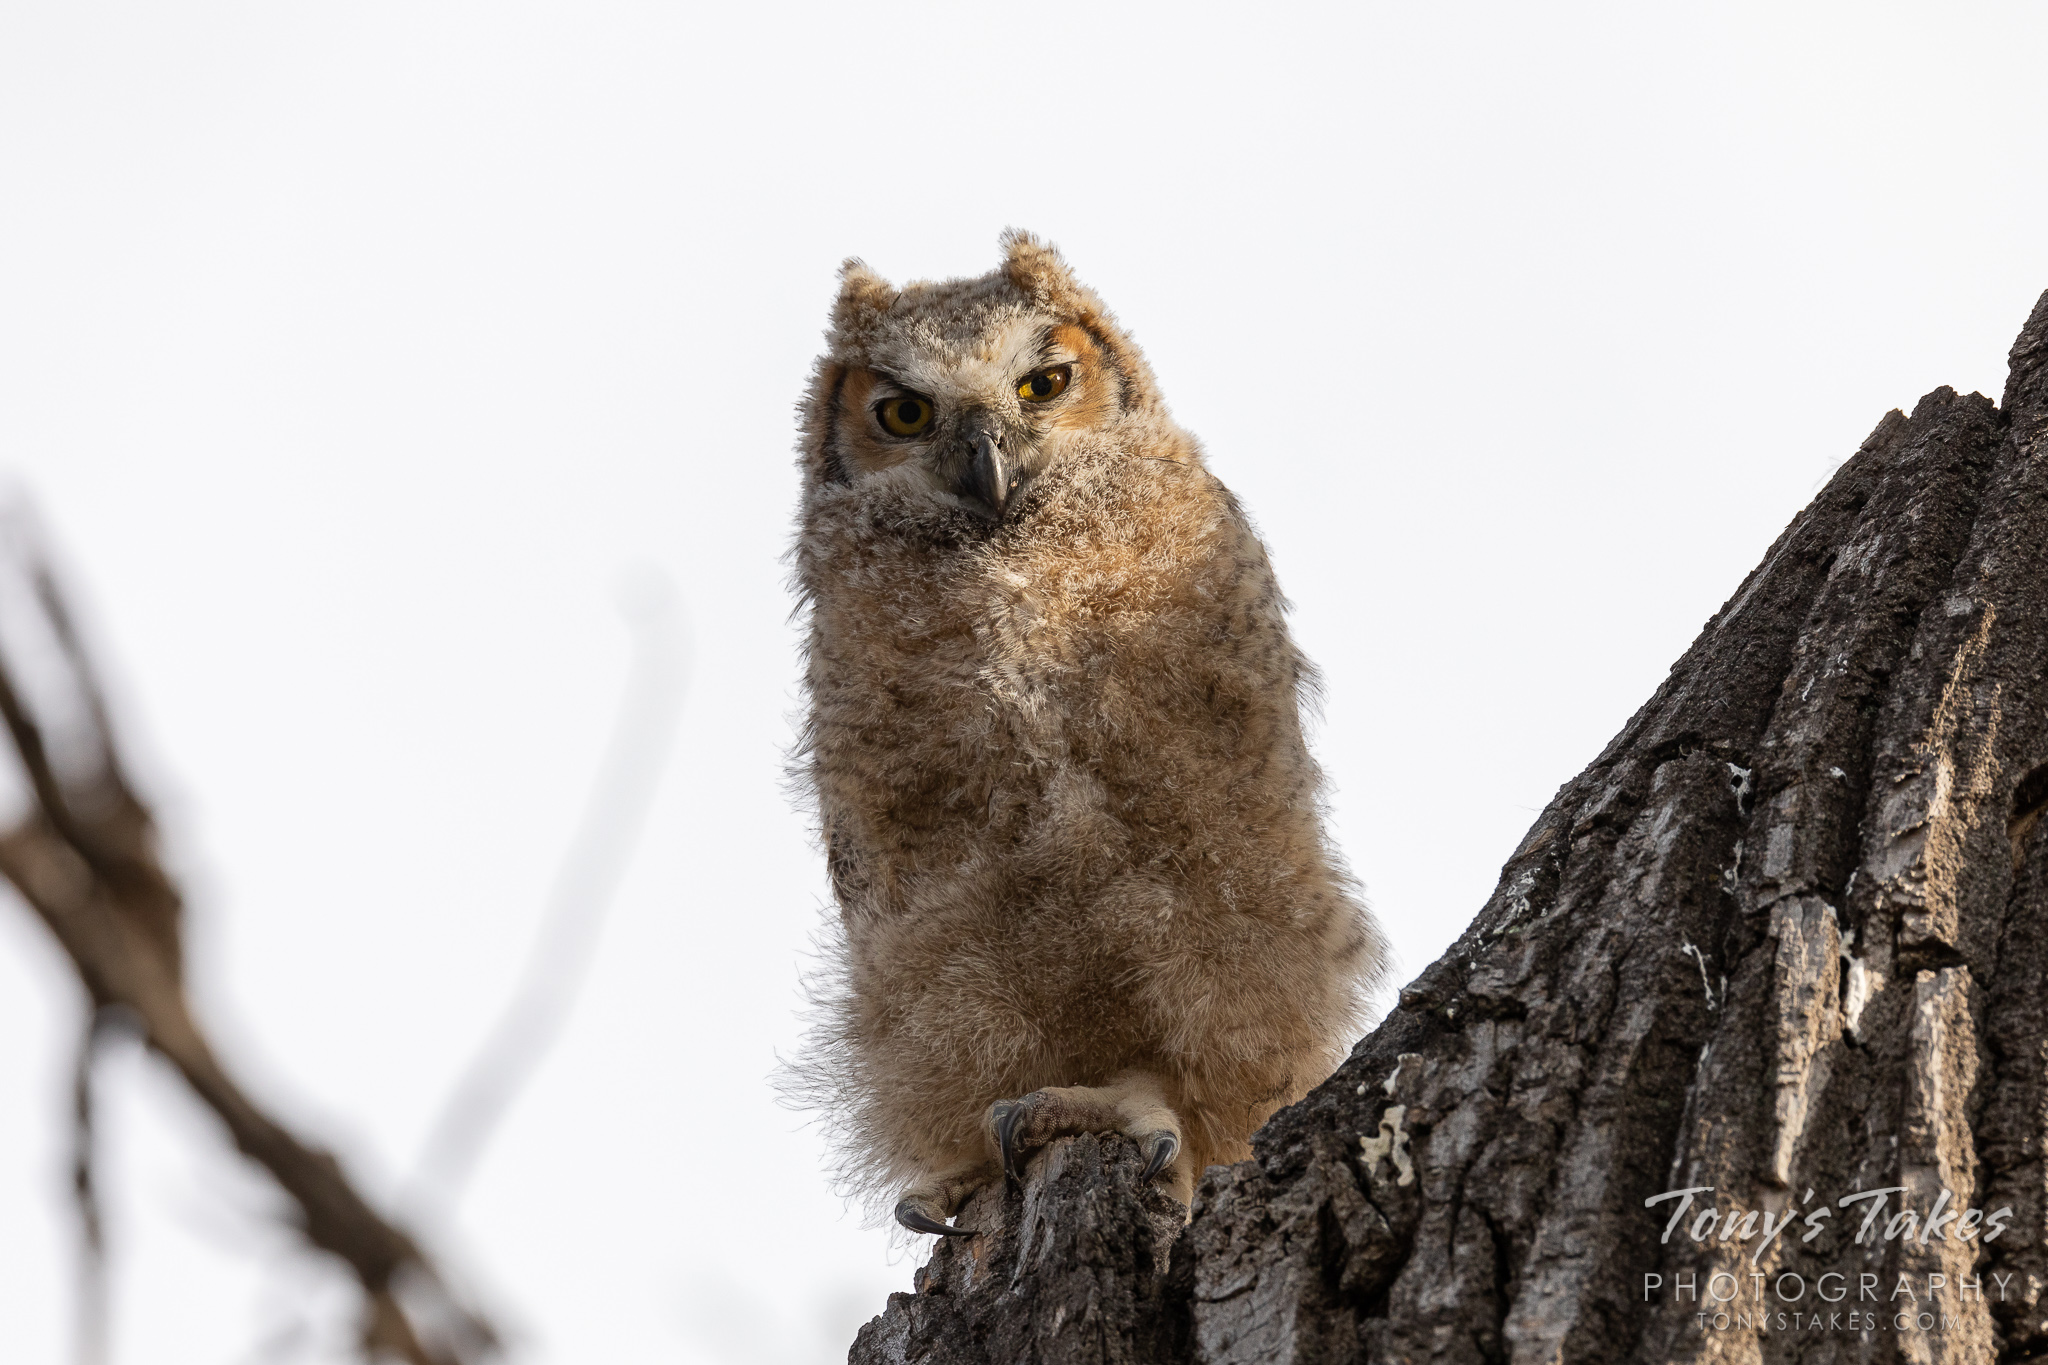 Great horned owl owlet stands tall, focuses on the photographer